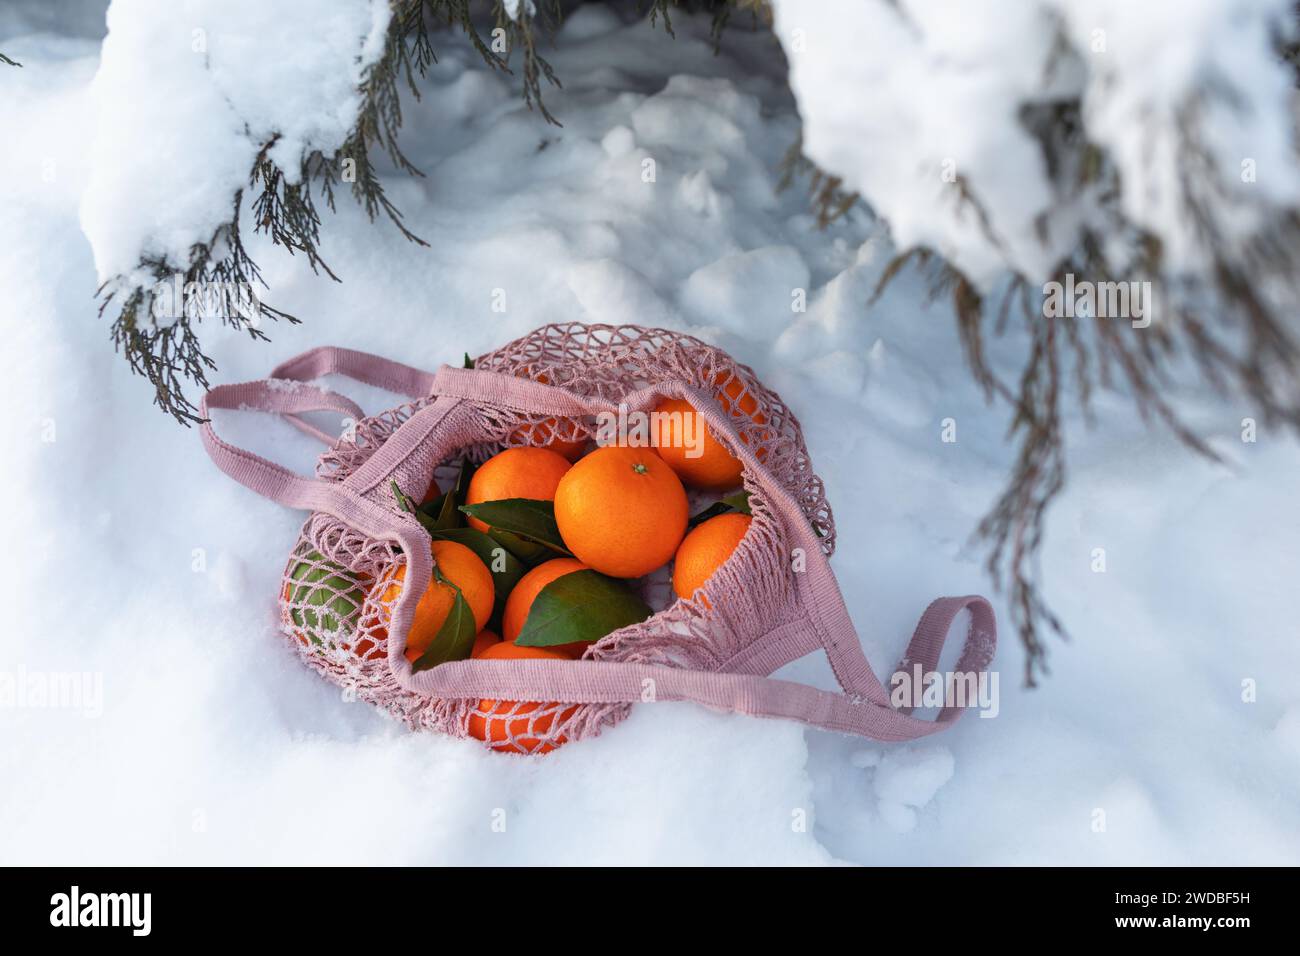 A string bag full of tangerines on the snow under the Christmas tree Stock Photo